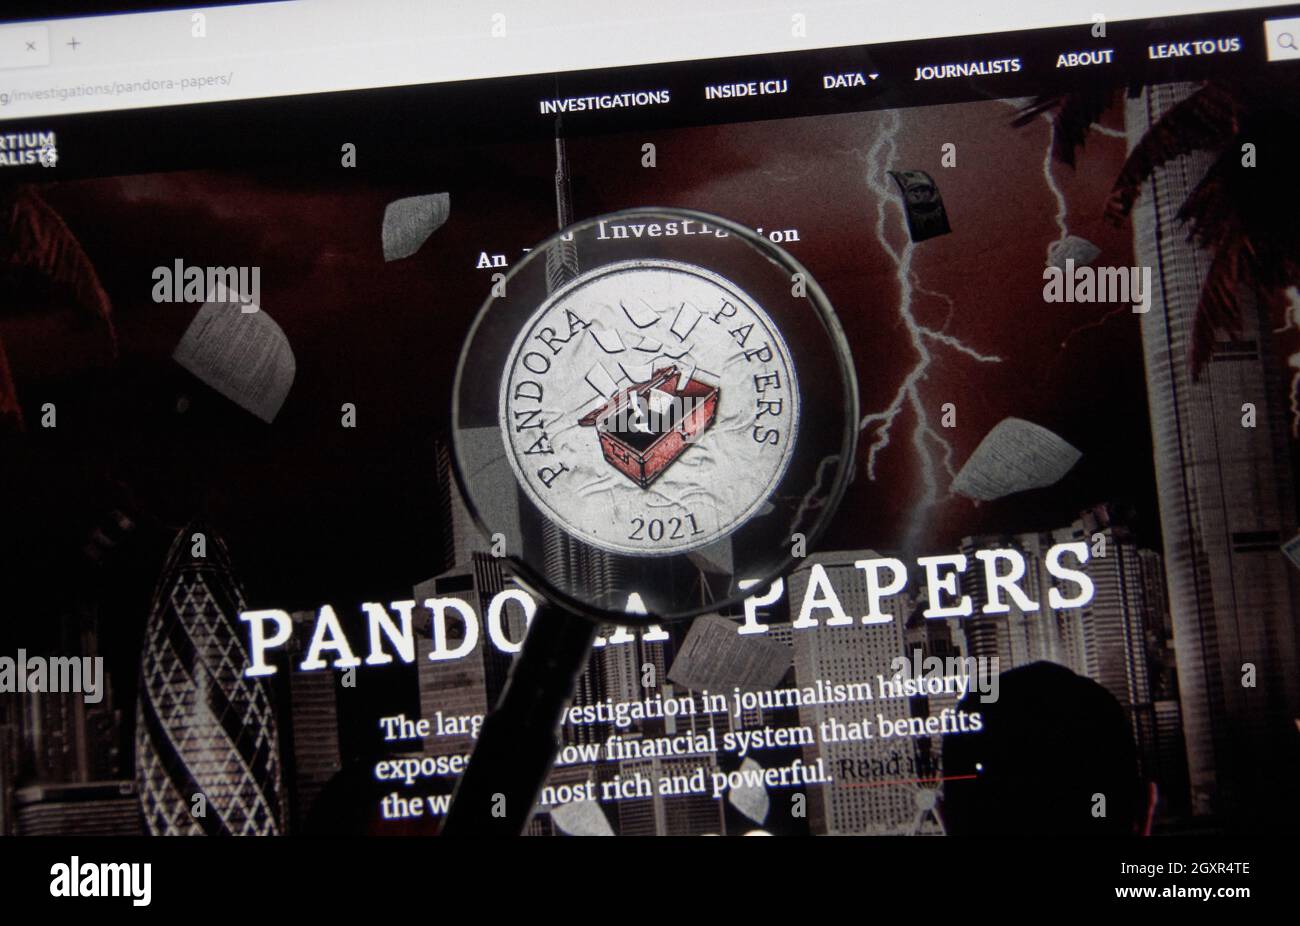 Montreal, Canada - October 5, 2021: The Pandora Papers website. It's a leaked set of 12 million documents and files exposing the secret wealth and dea Stock Photo